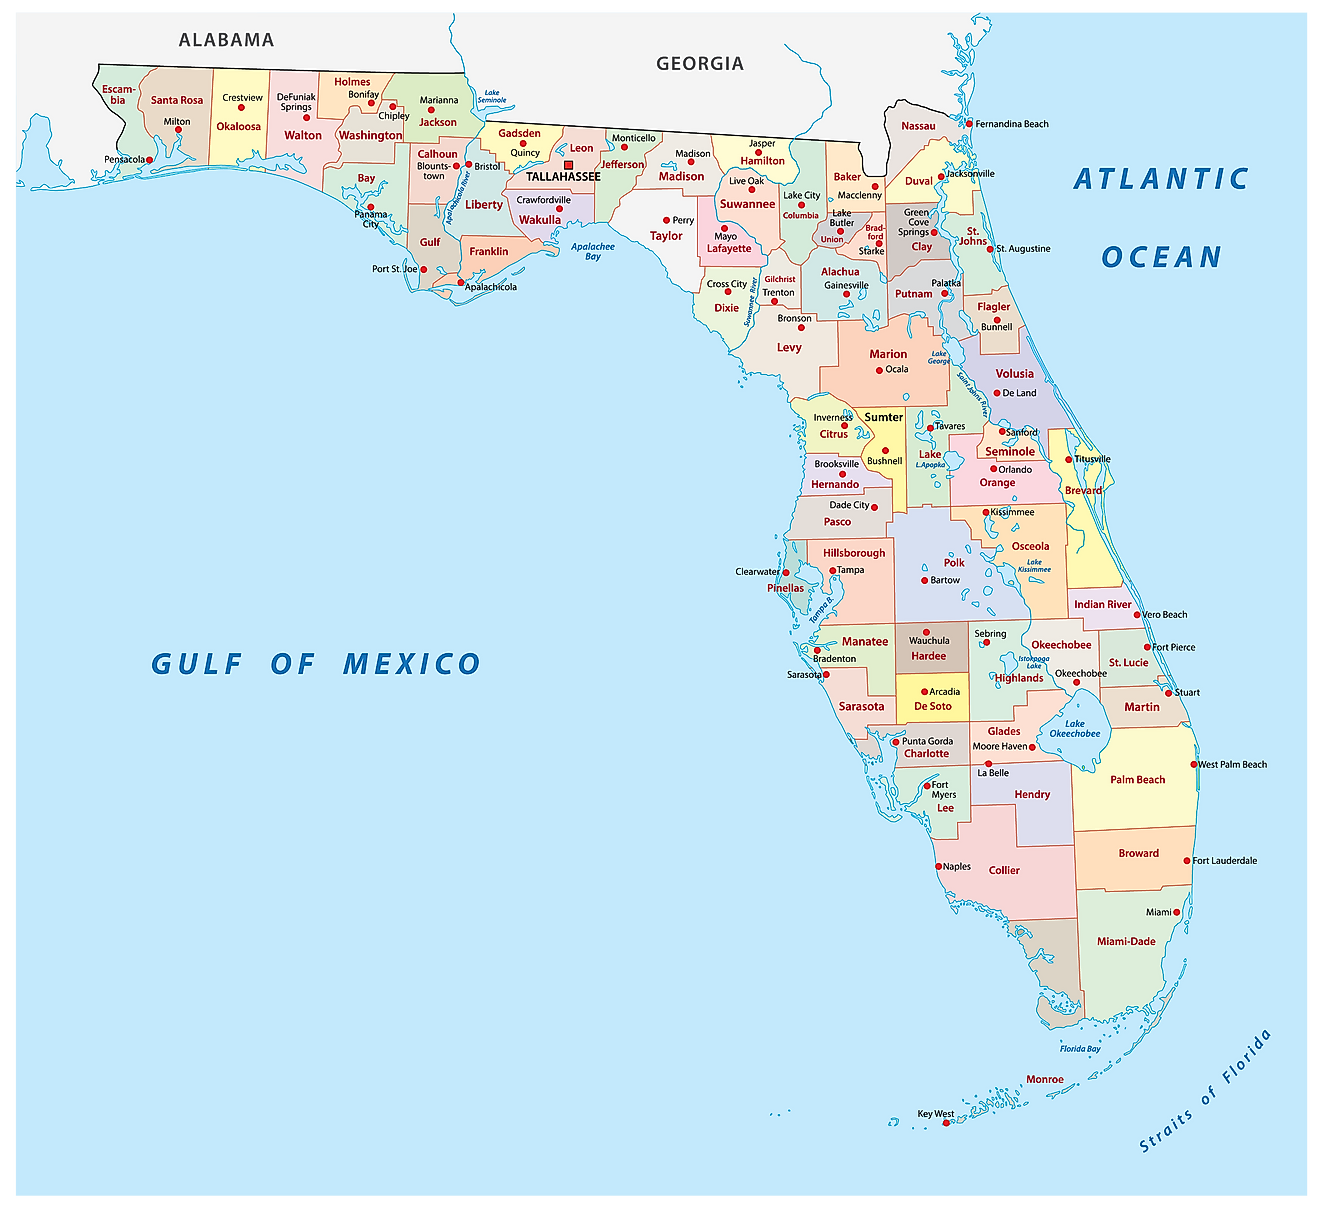 Administraitve Map of Florida showing its 67 counties and its capital city - Tallahassee